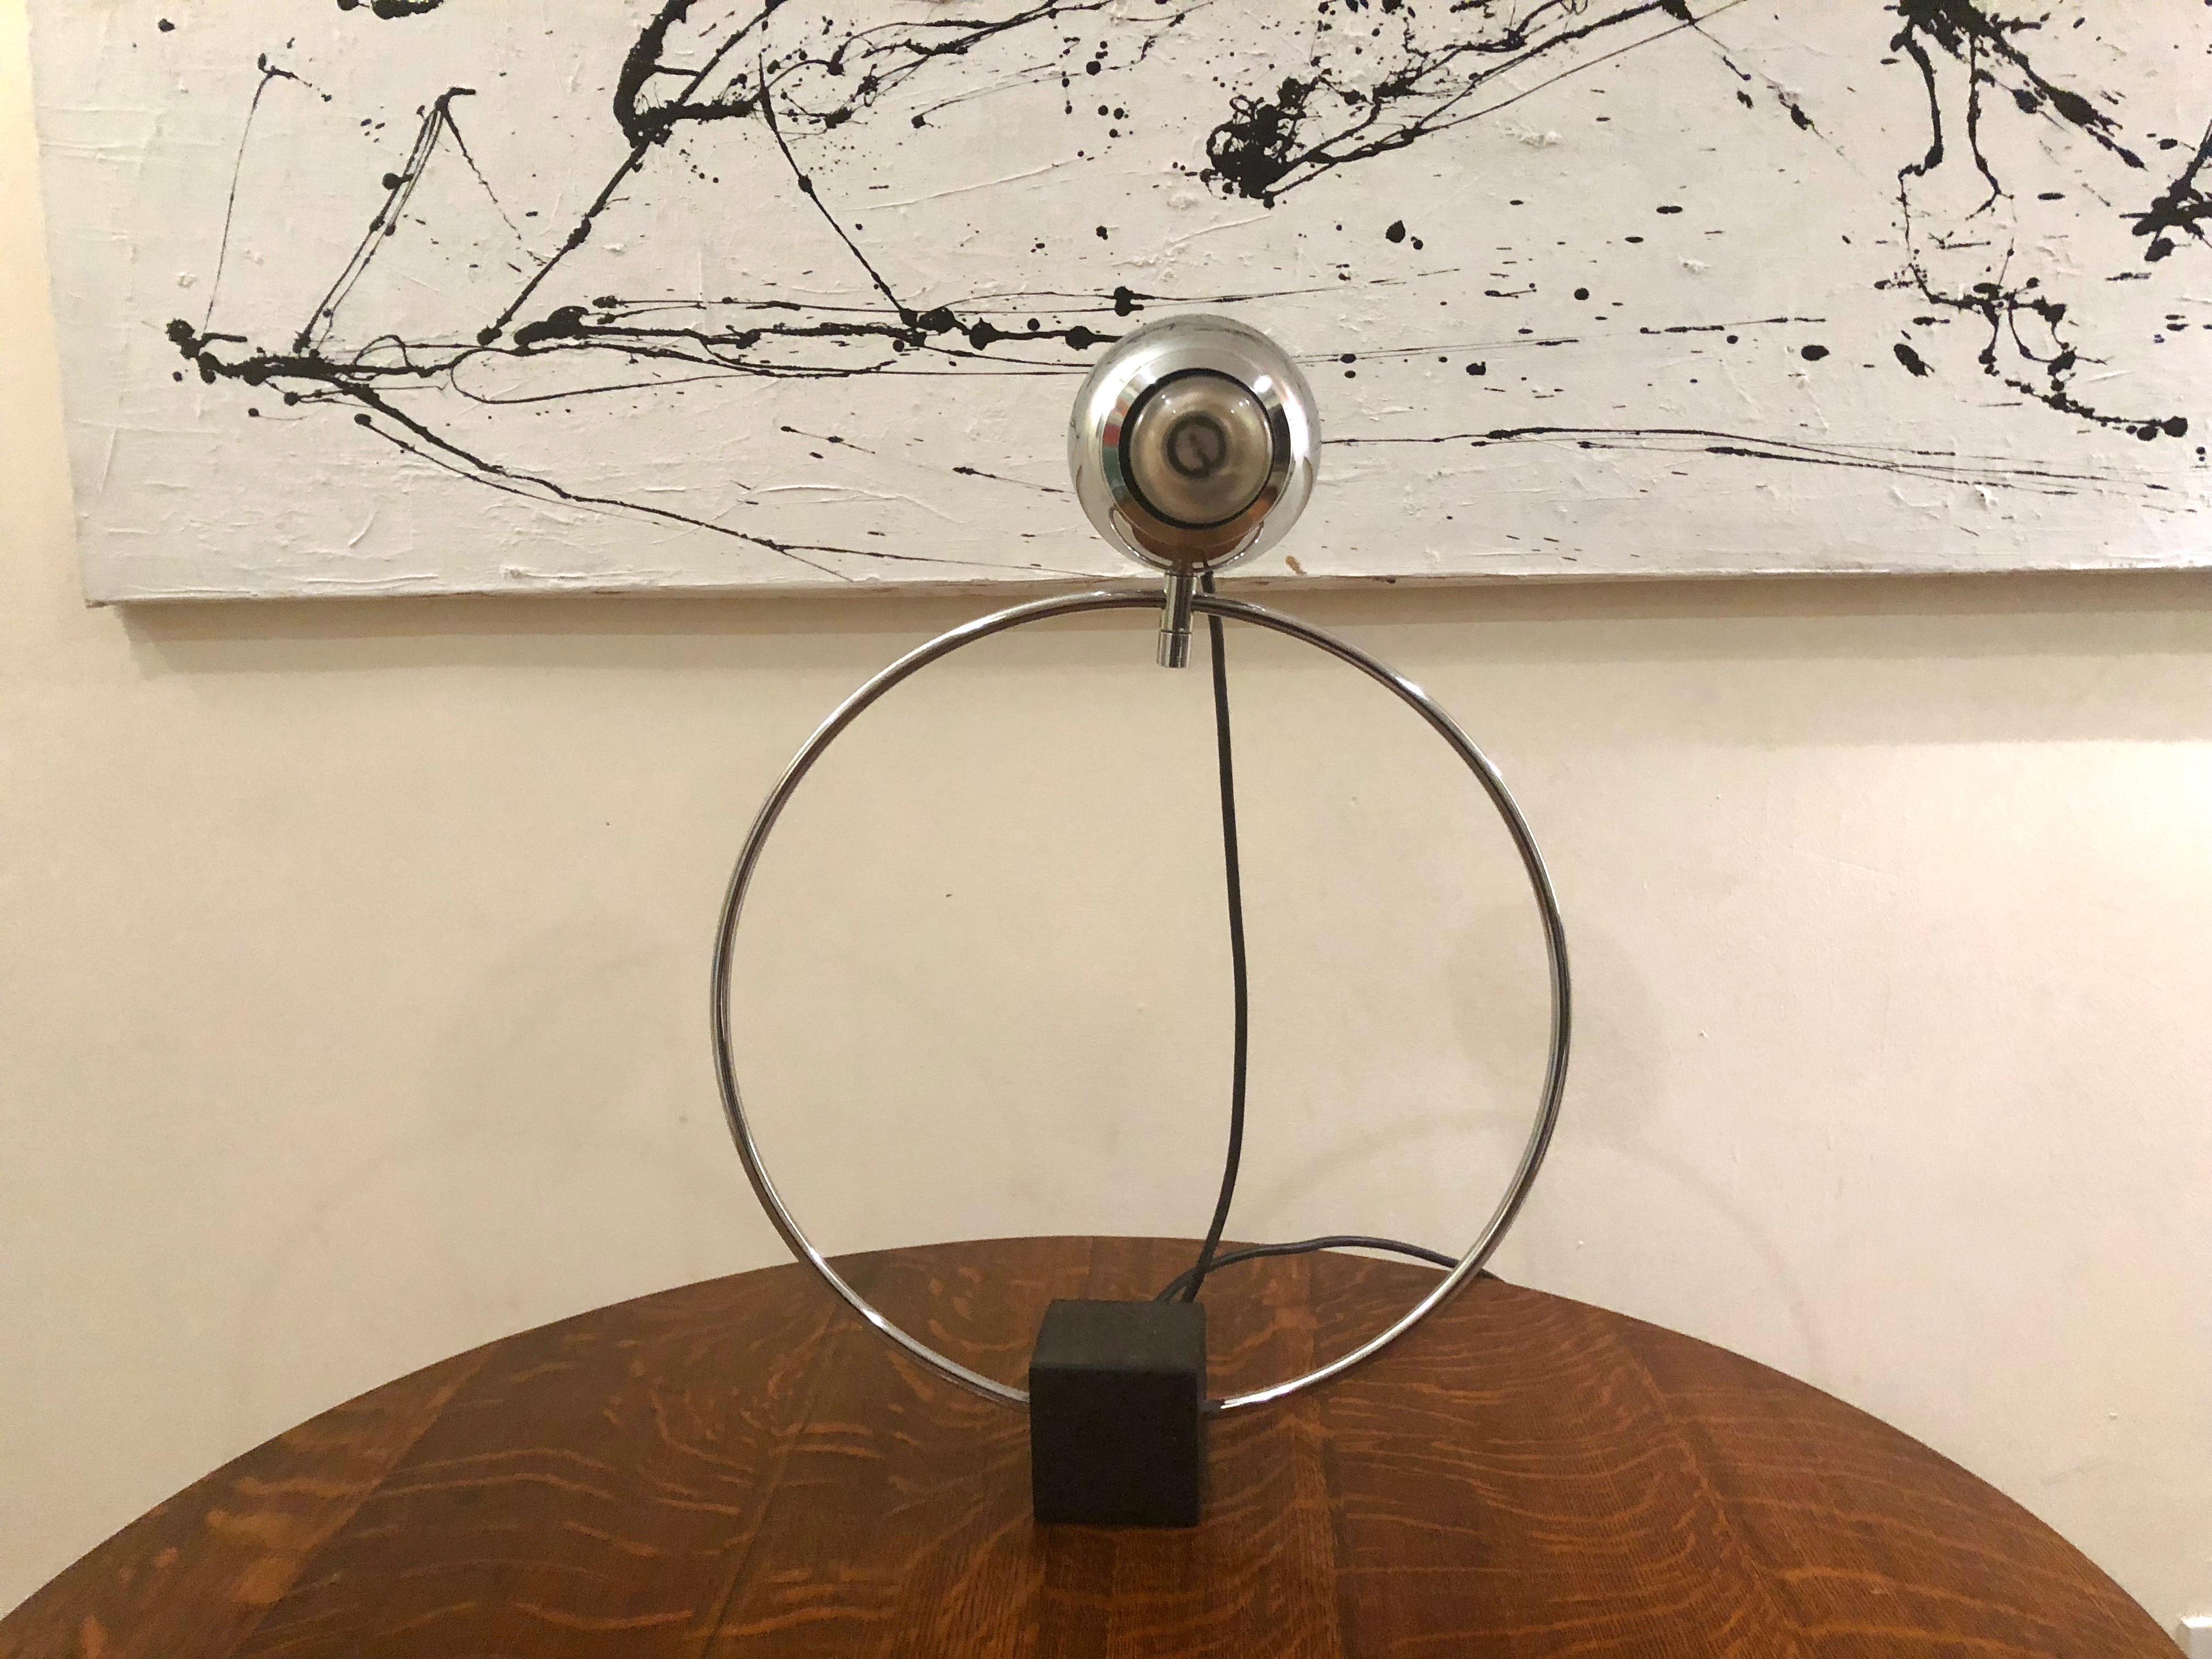 Table / desk lamp comprises a blackened steel cube-shaped base that supports a circular frame of tubular, polished chrome plated metal and atomic shaped diffuser also in polished chromed metal. The diffuser is a 360-degree articulating spherical